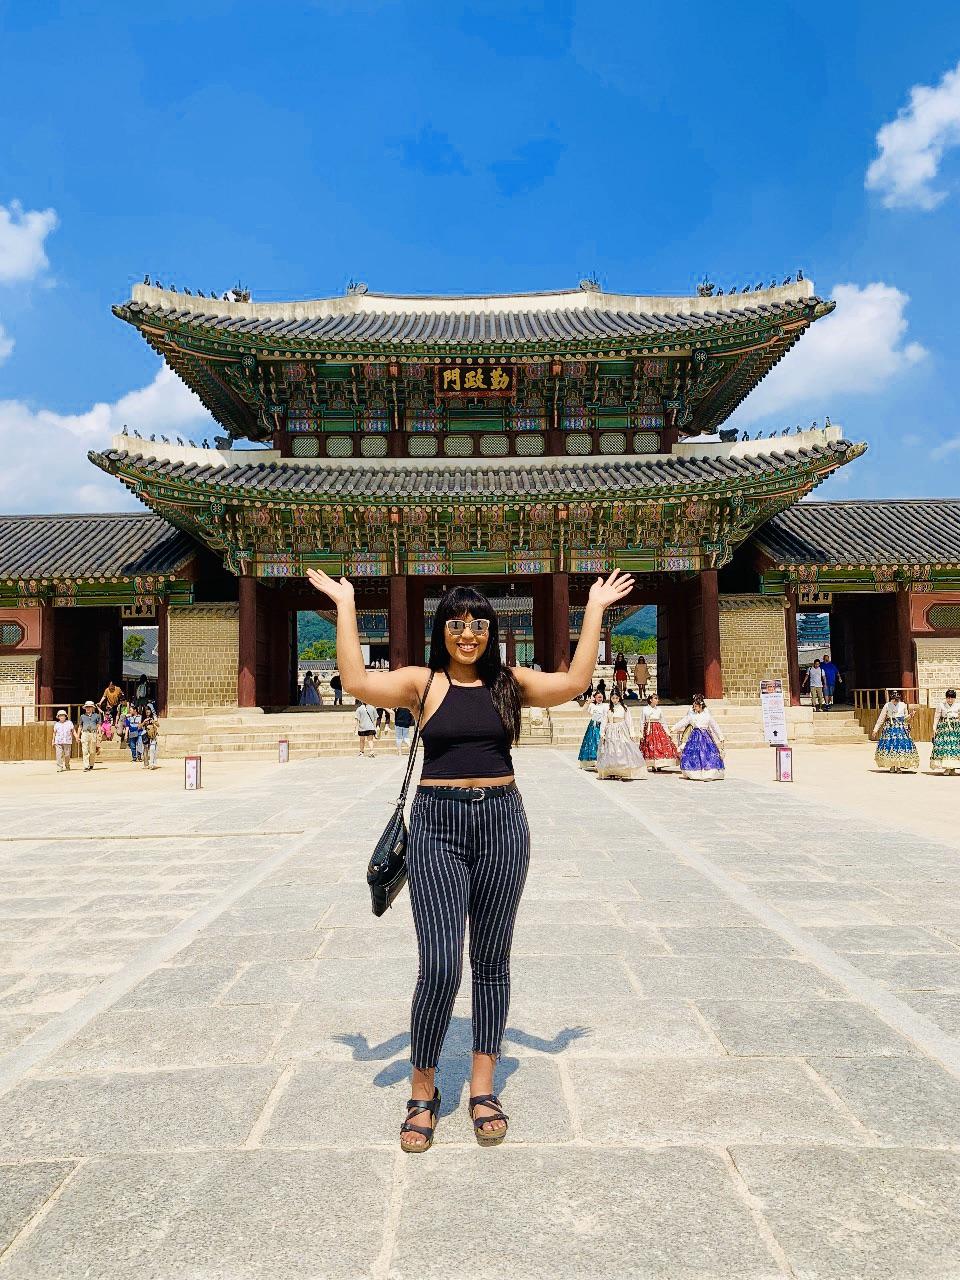 student in front of pagoda-style building